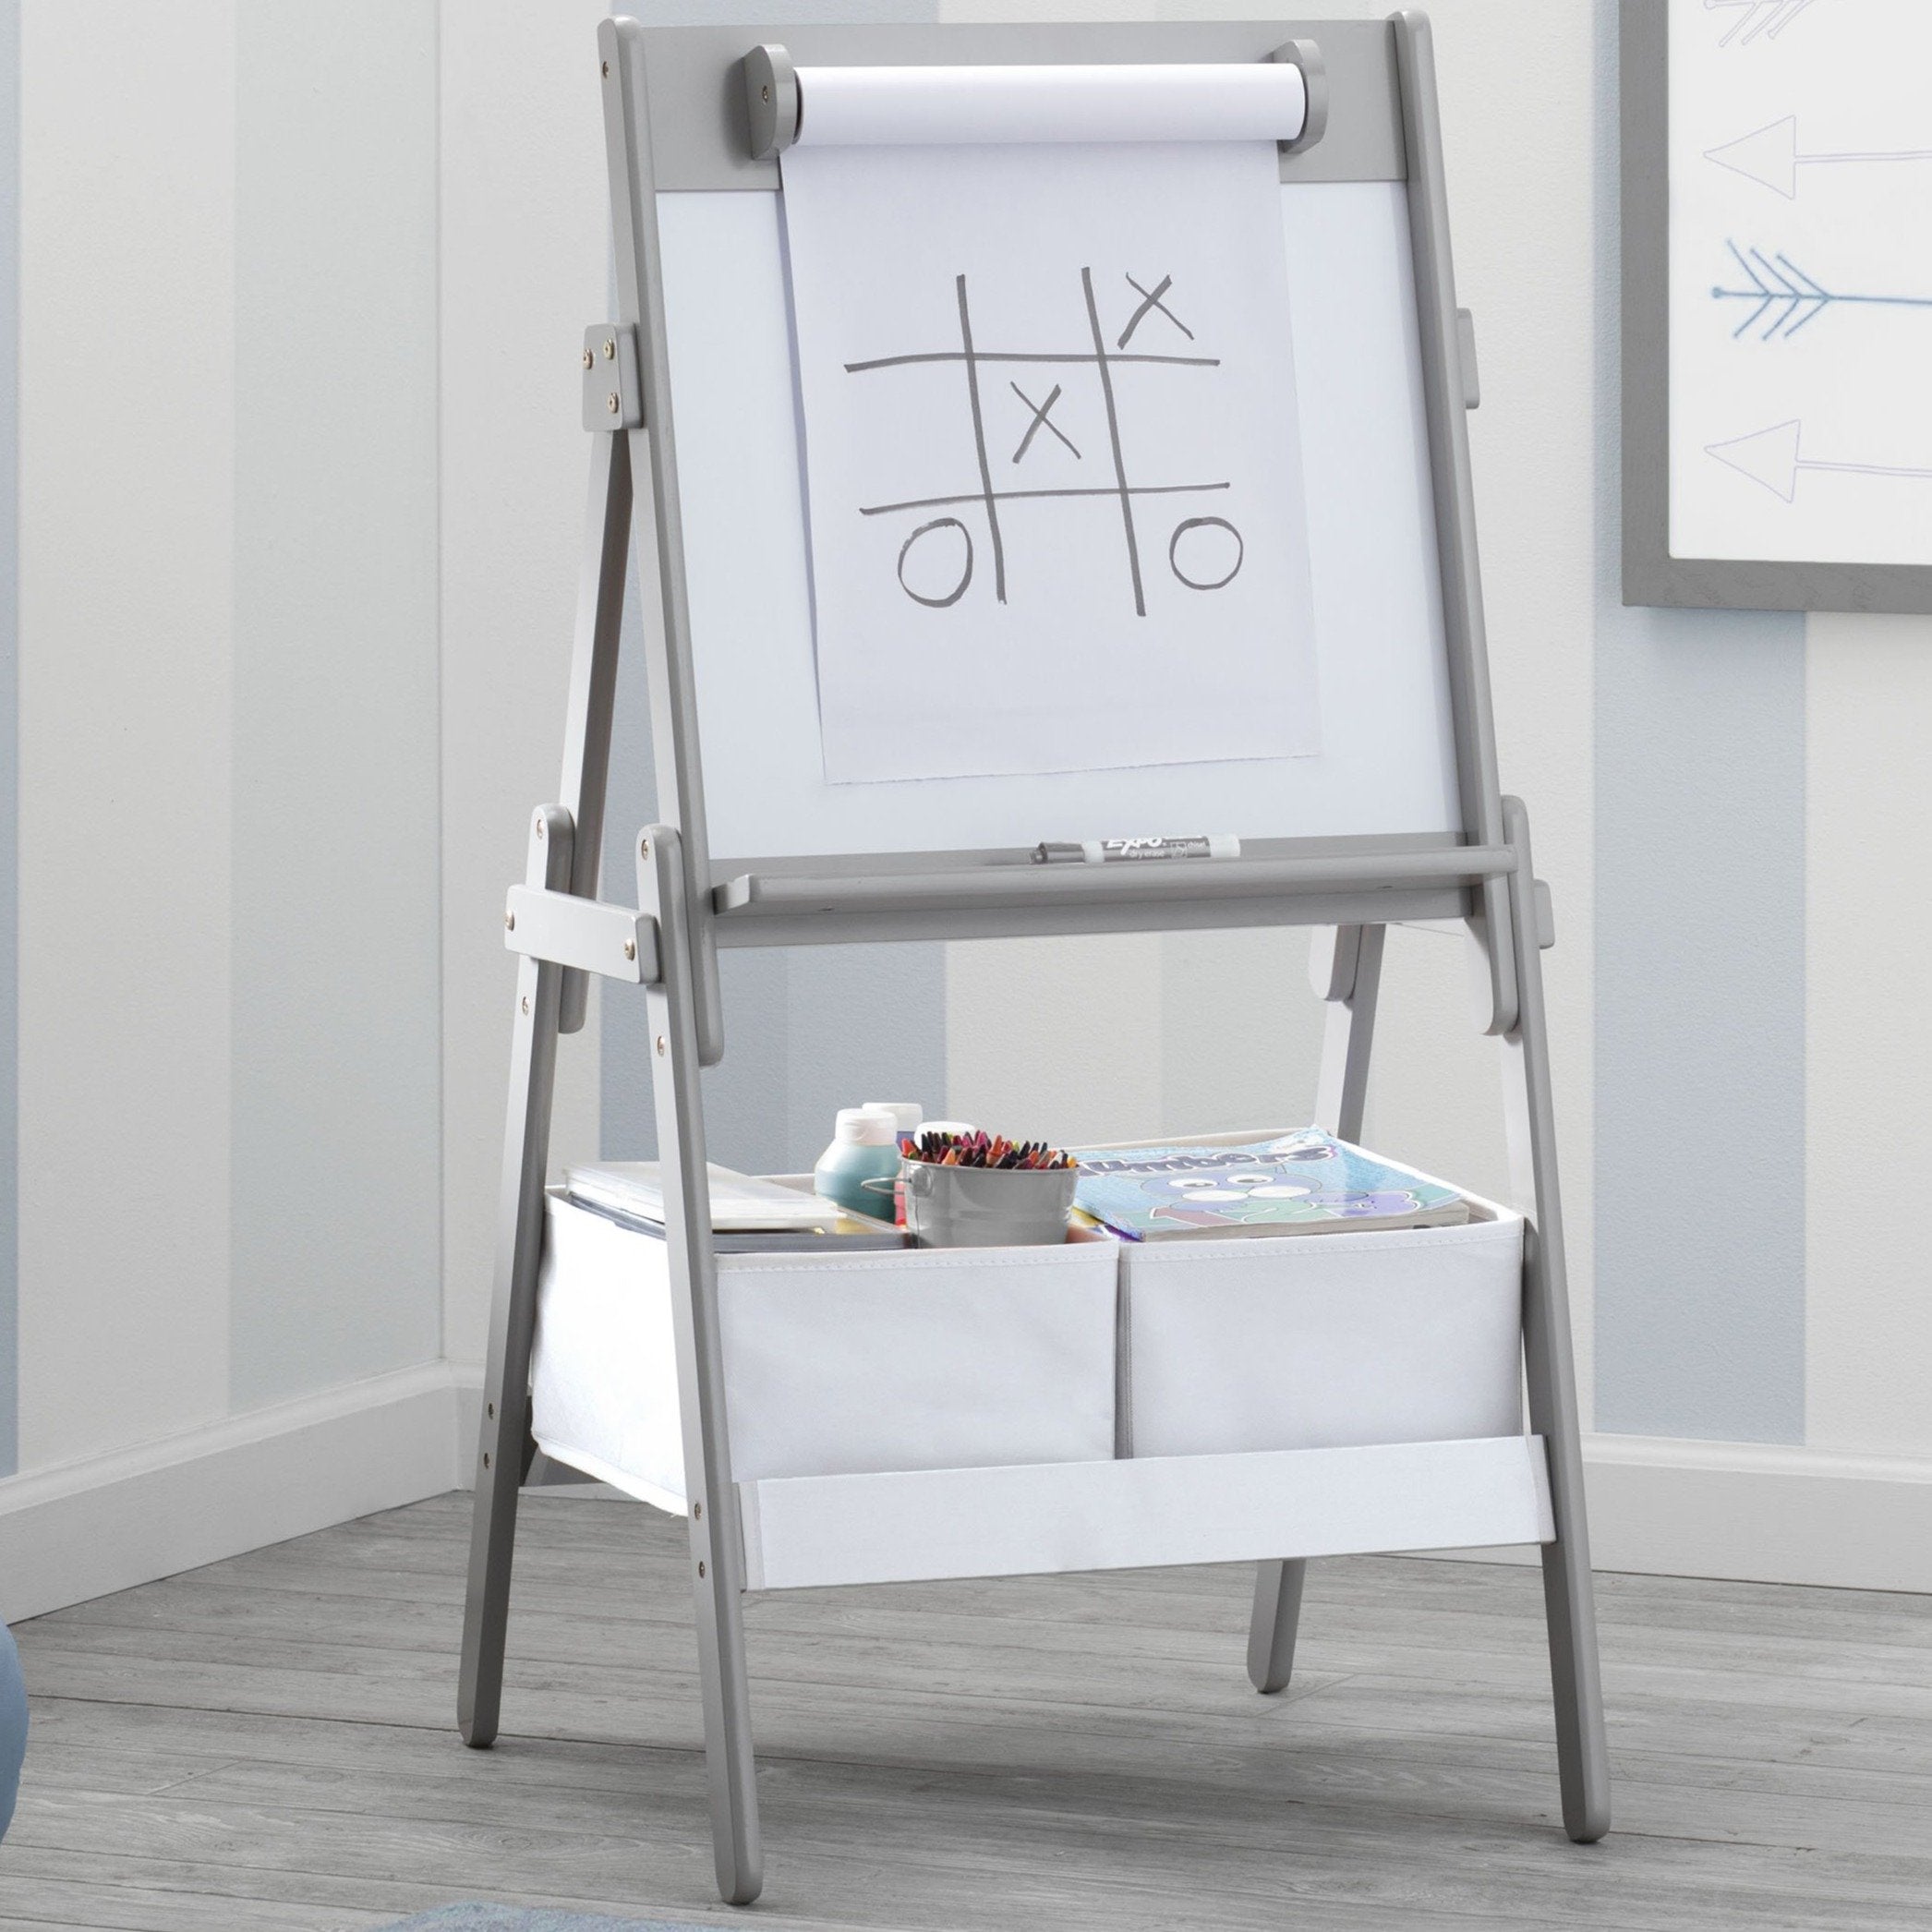 Magic Wooden Double-Sided Easel 2-in-1 Chalkboard and Dry Erase